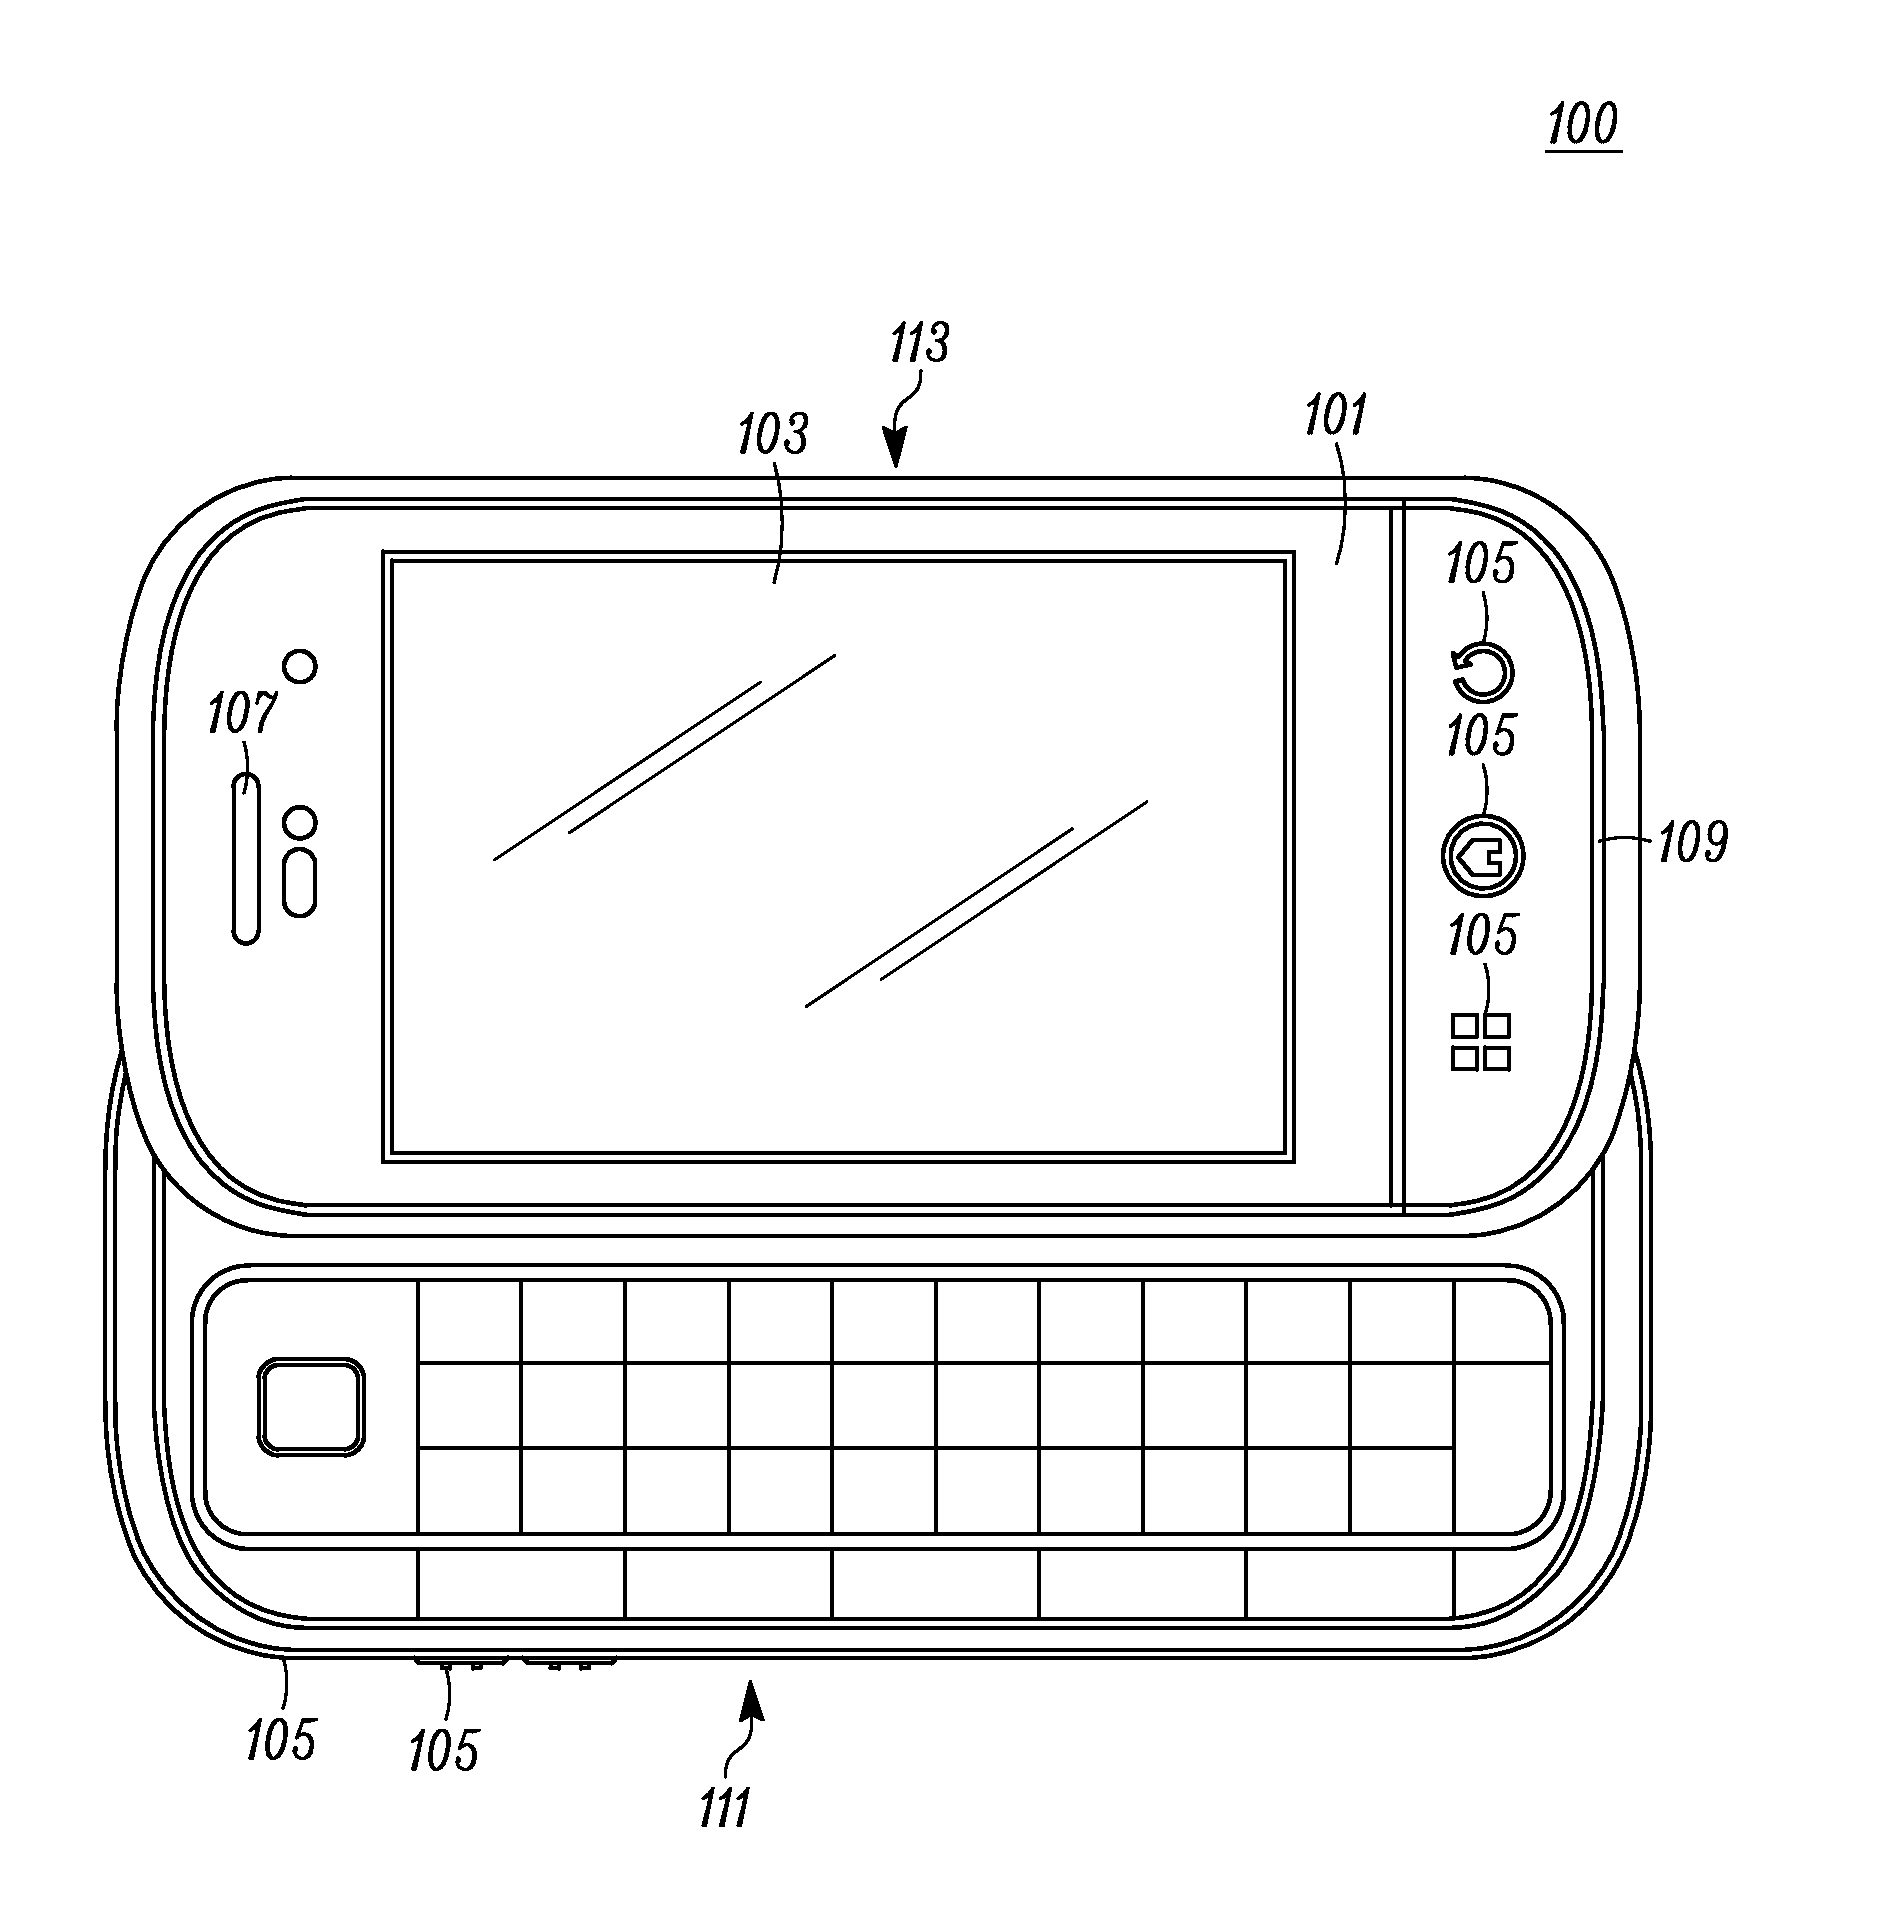 Method for an electronic device for providing group information associated with a group of contacts